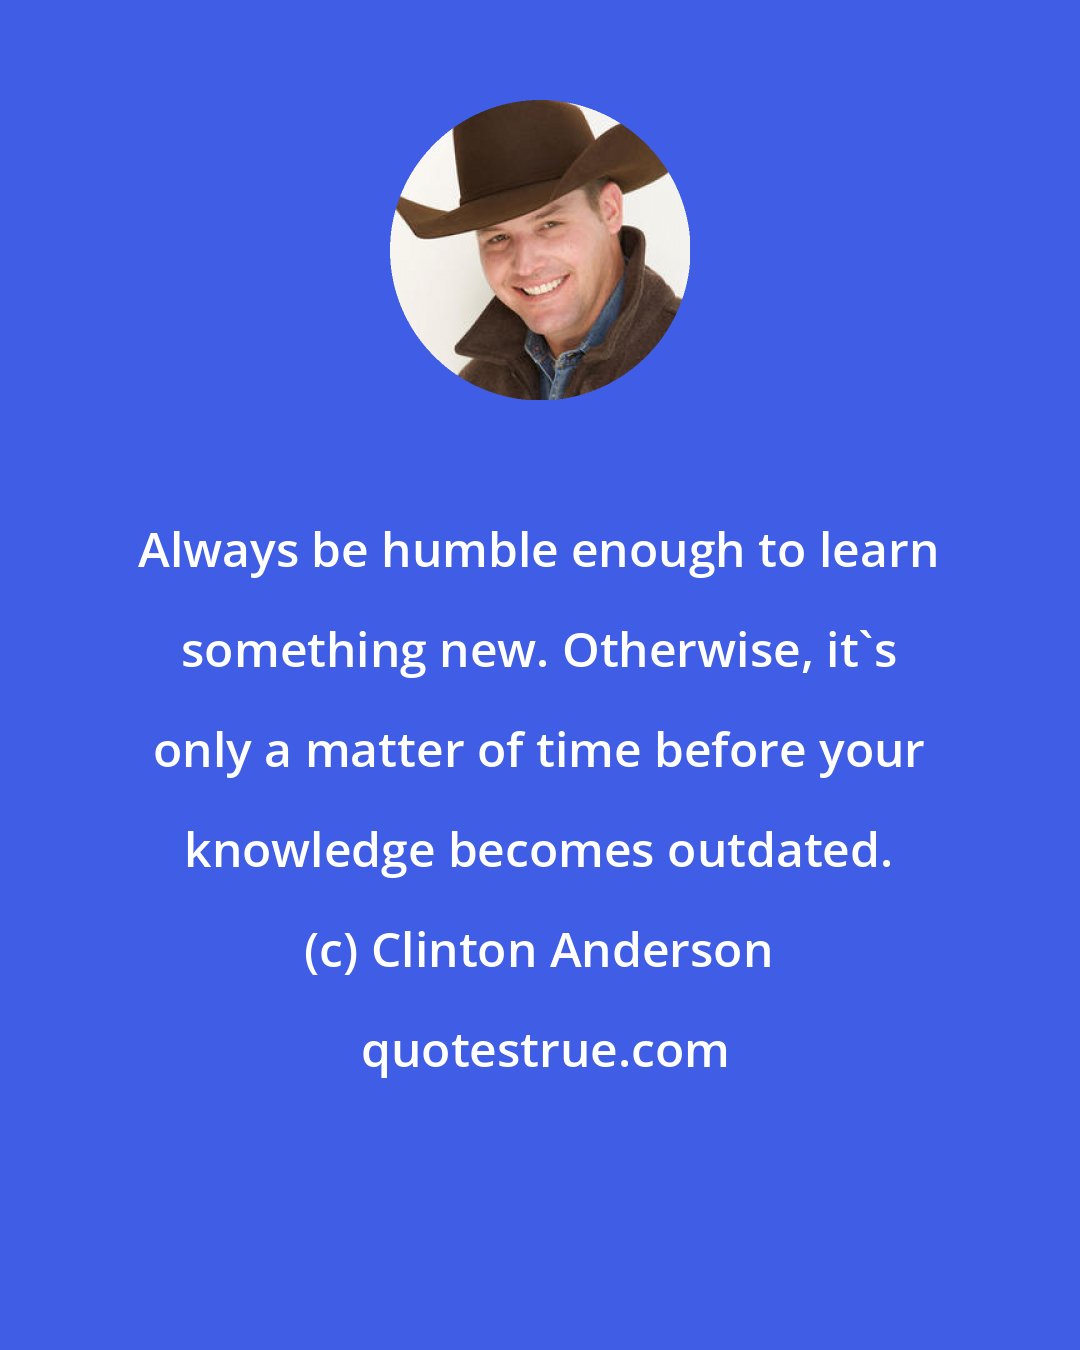 Clinton Anderson: Always be humble enough to learn something new. Otherwise, it's only a matter of time before your knowledge becomes outdated.